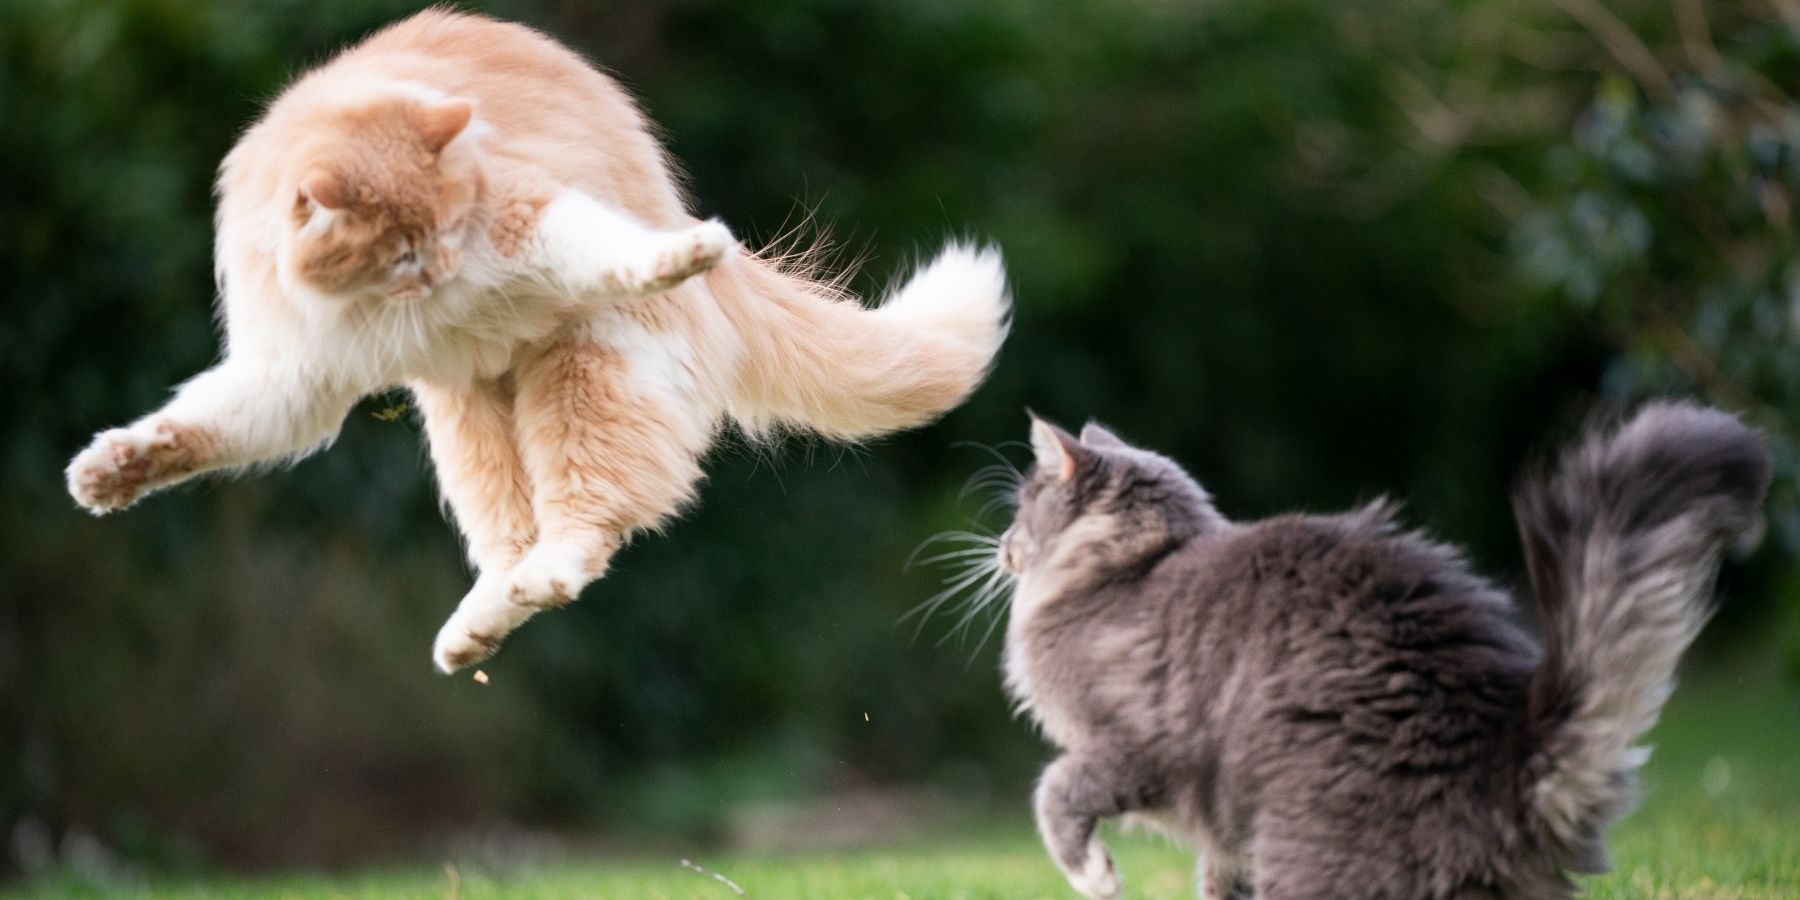 Are Your Feline Friends Fighting or Just Playing?